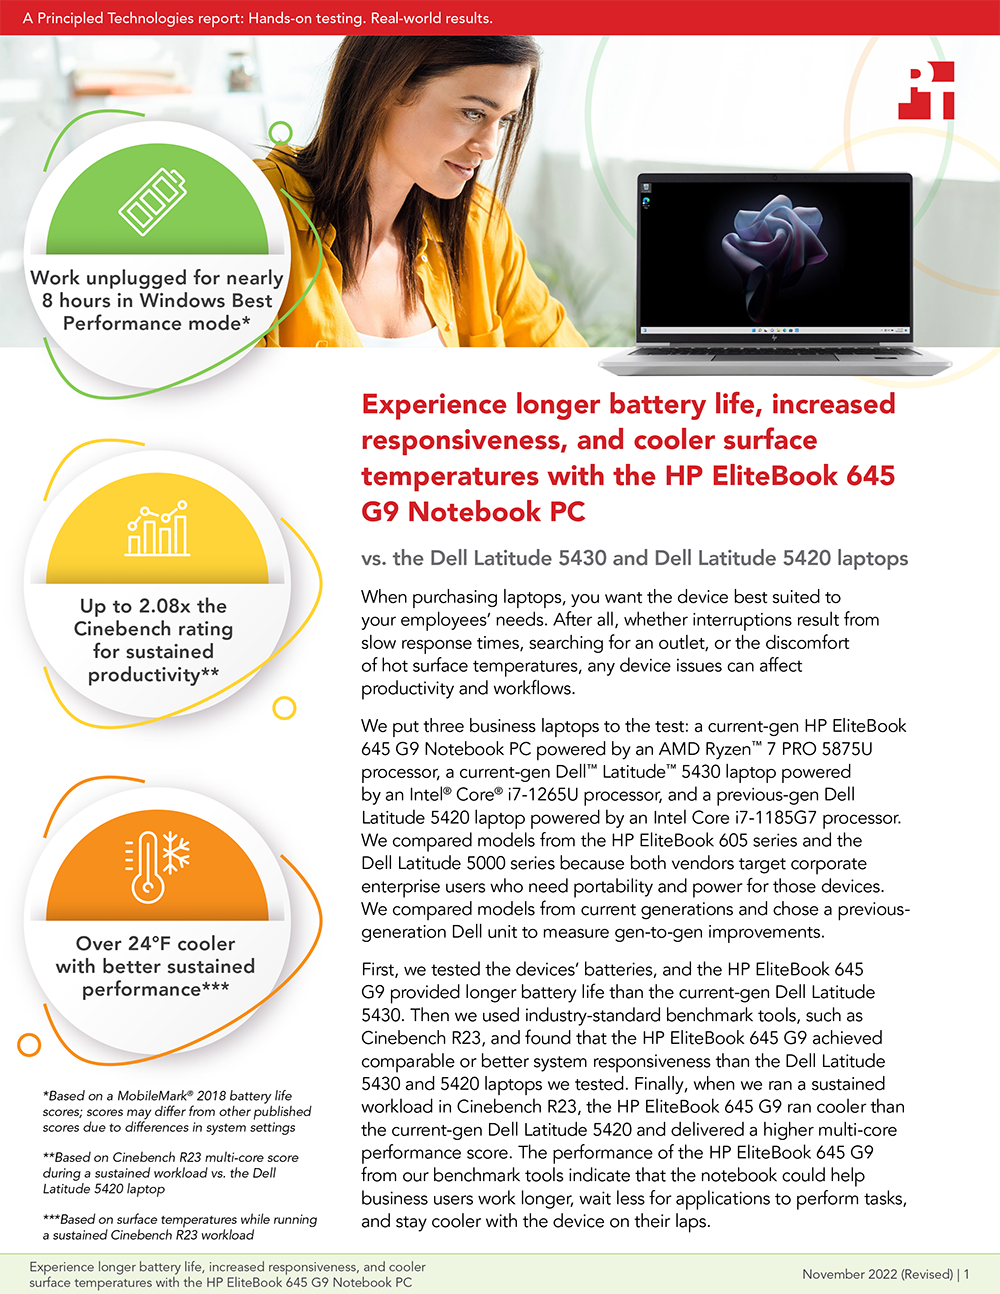 Principled Technologies Releases Study on the HP EliteBook 645 G9 Notebook PC’sSystem Responsiveness, Battery Life, and Surface Temperatures